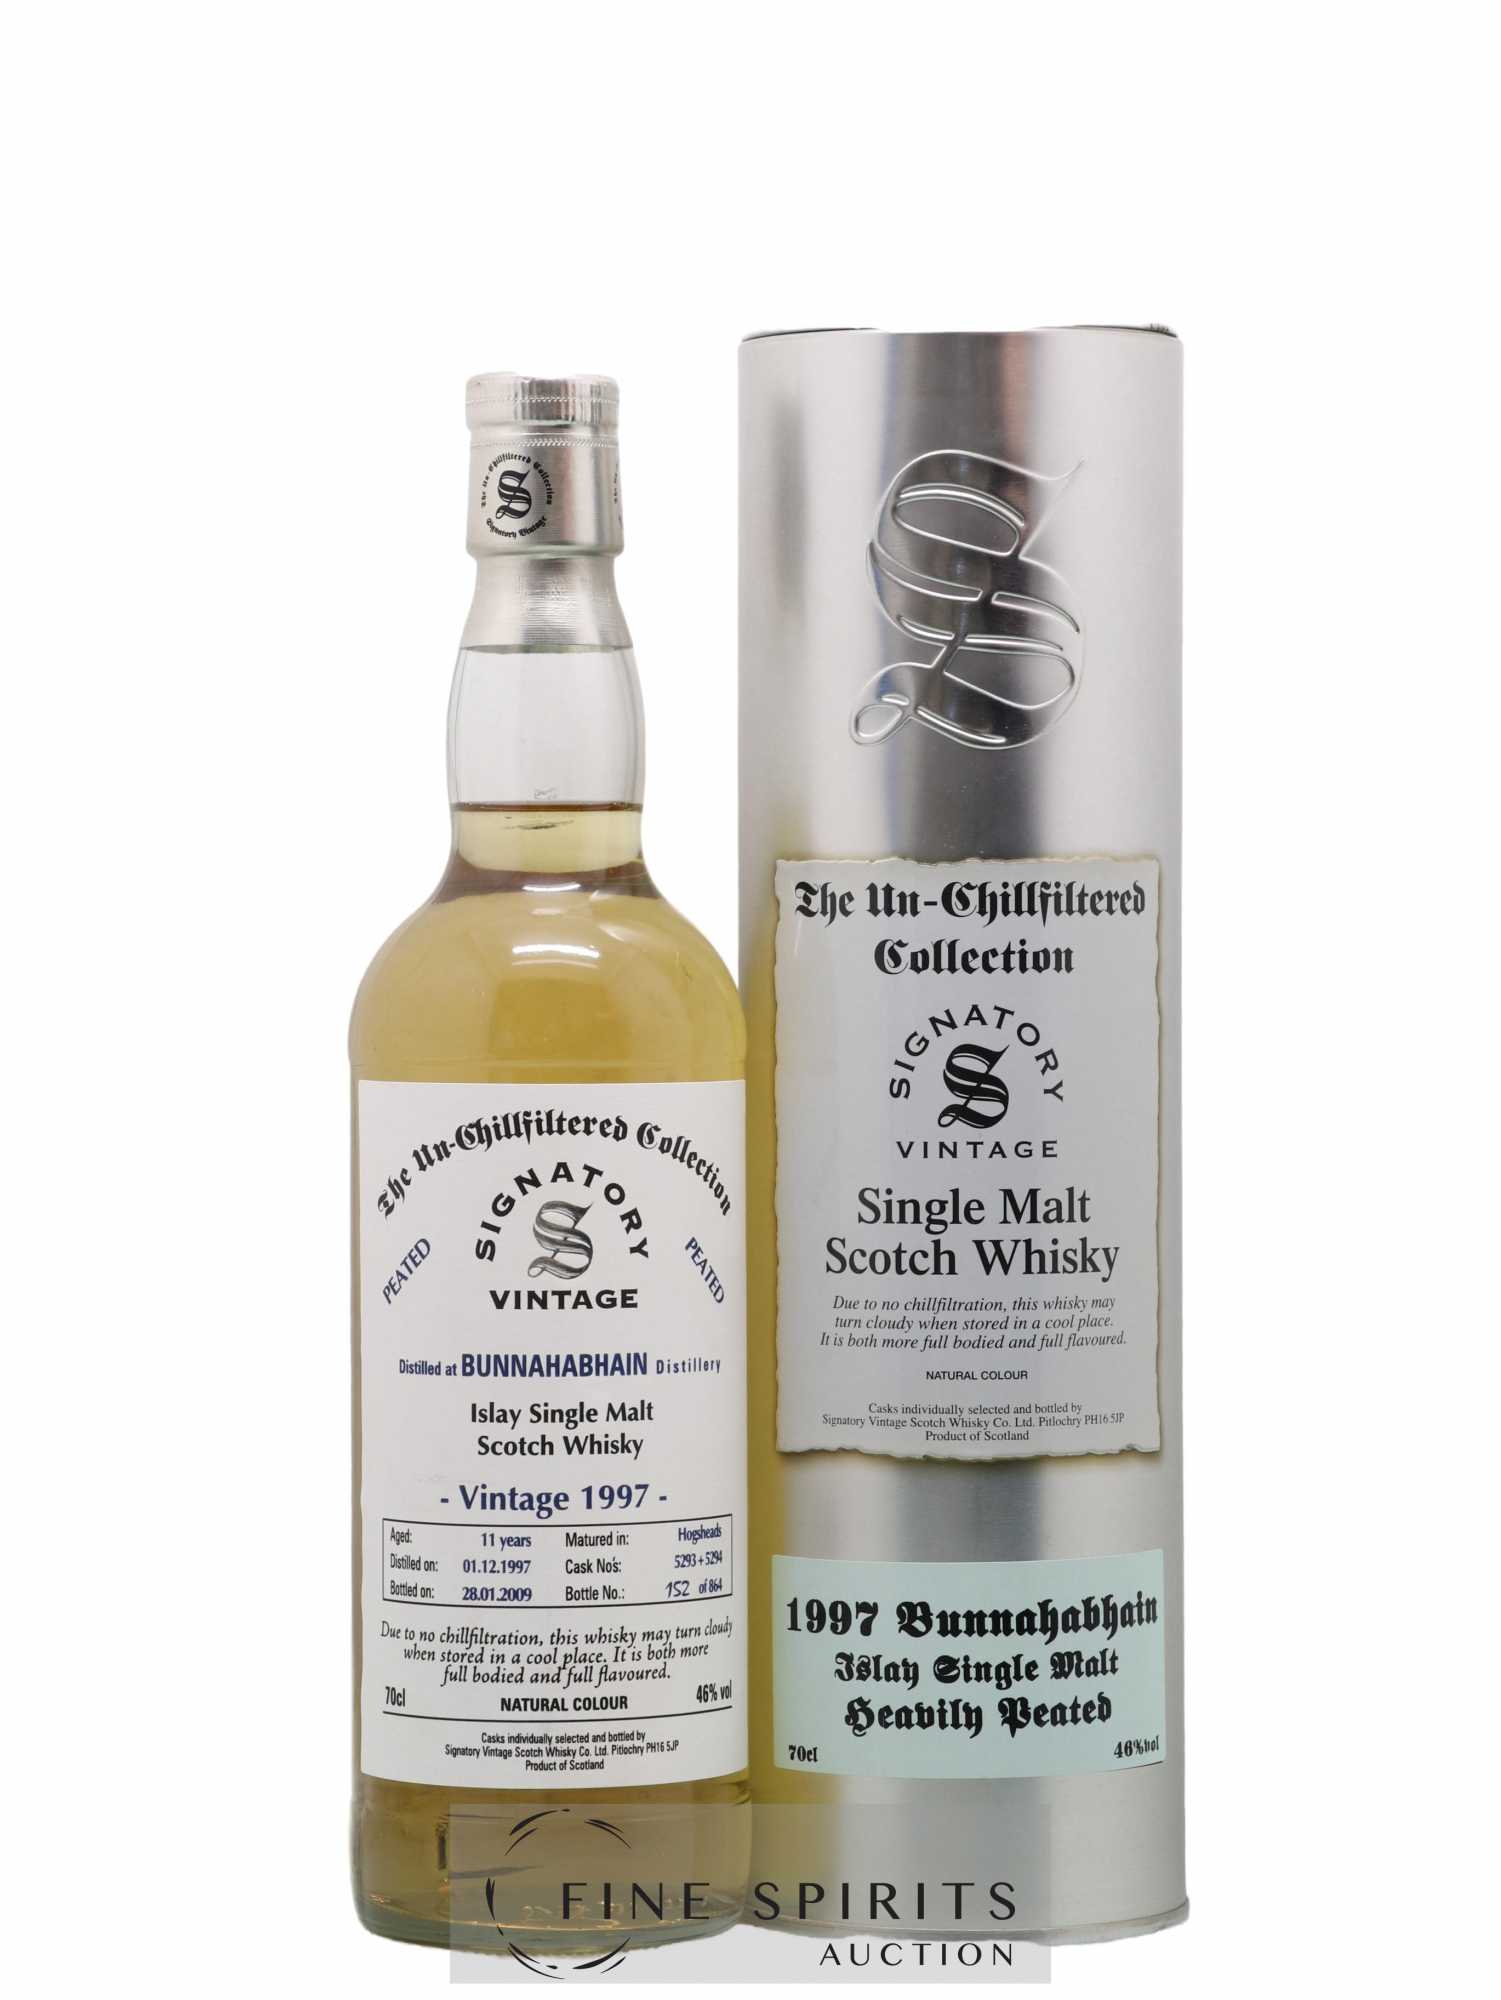 Bunnahabhain 11 years 1997 Signatory Vintage Hogsheads Casks n°5293-5294 - One of 864 - bottled 2009 The Un-Chillfiltered Collection